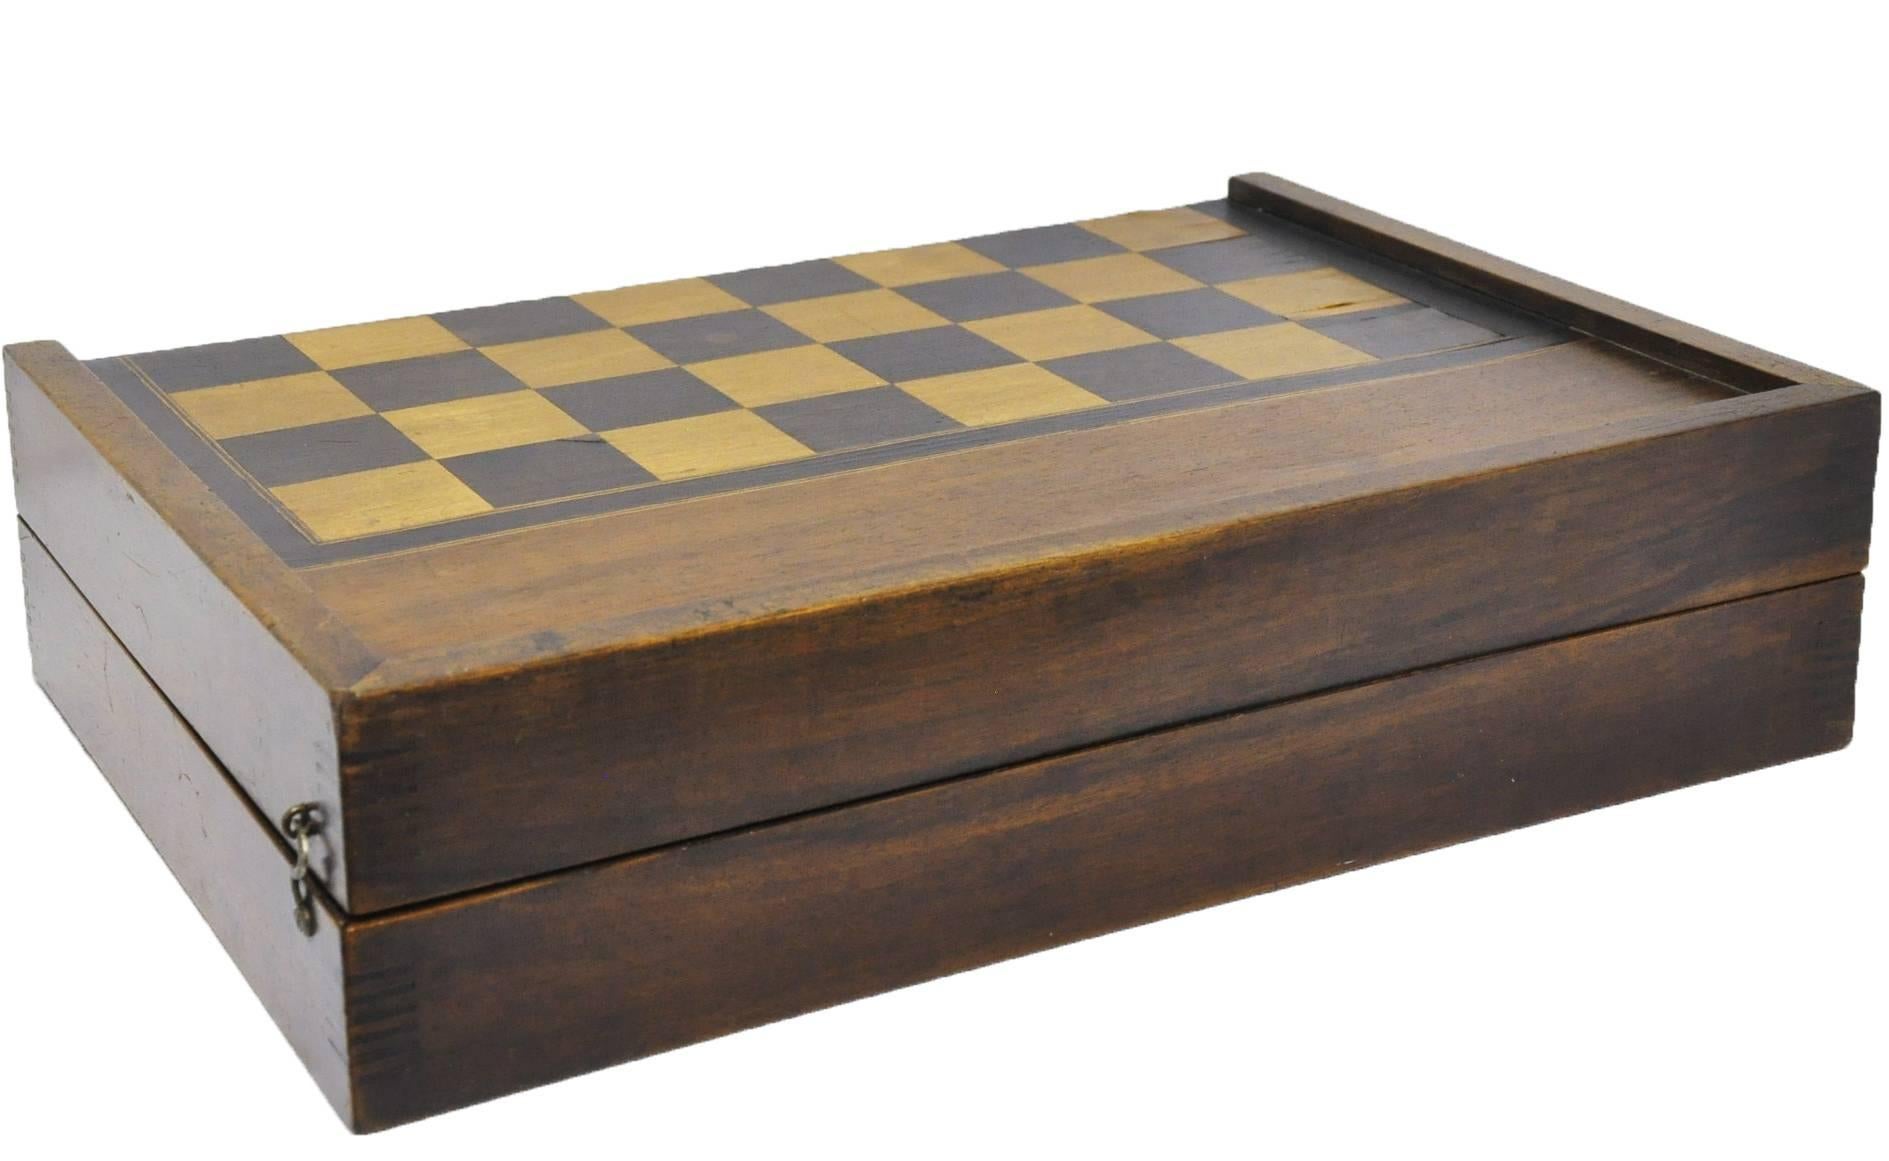 This antique fruit wood checkers and backgammon game was crafted in France, circa 1880. The game box with a green felt bottom, is complete with its original dices and leather dice holder. The checkers board is in a classic, traditional style with